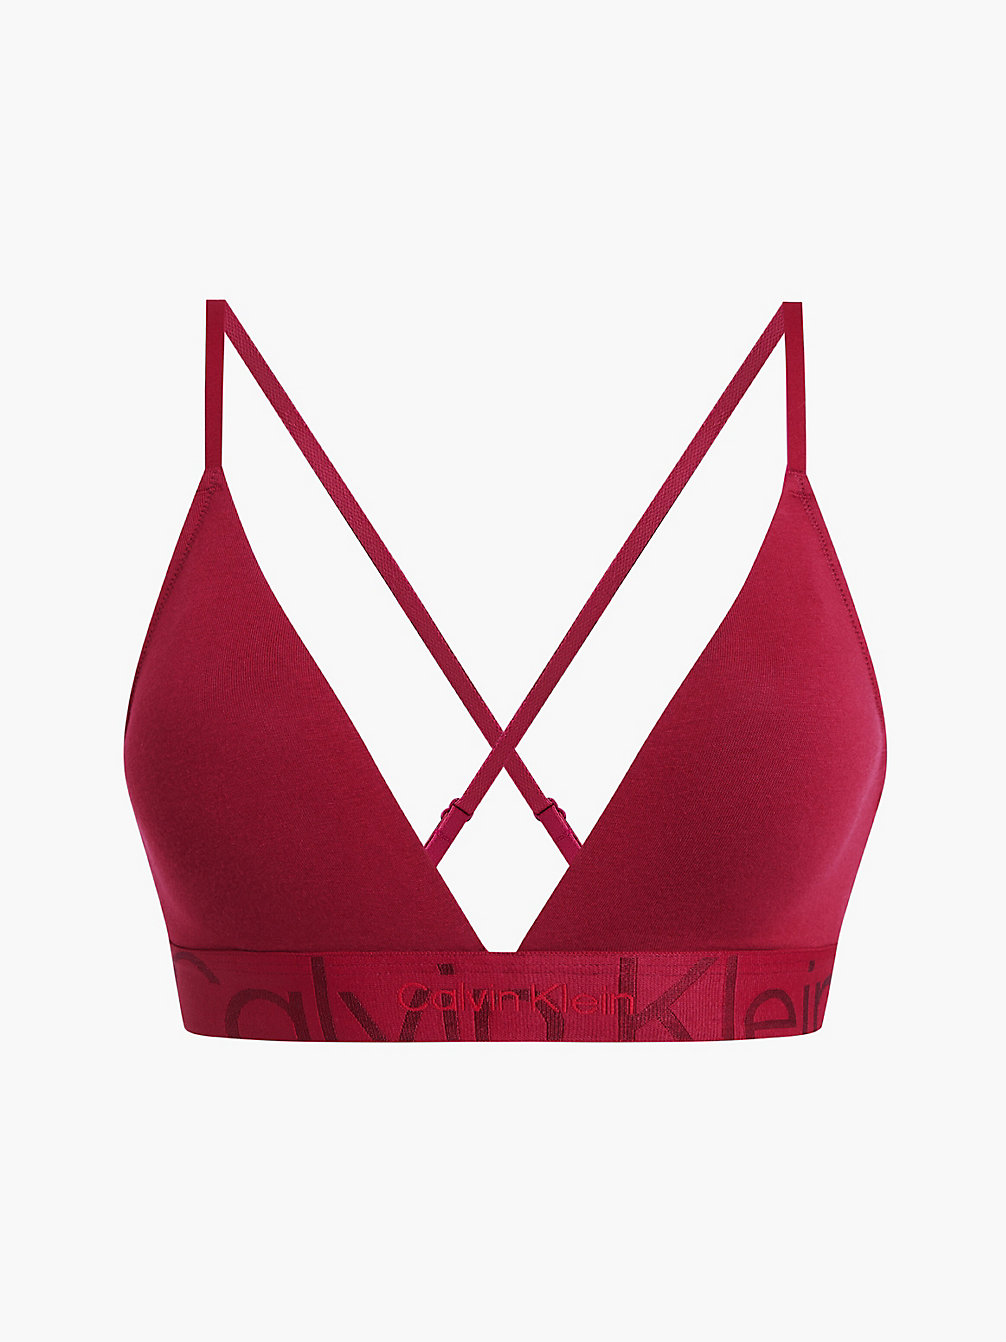 Soutien-Gorge Triangle - Embossed Icon > RED CARPET > undefined femmes > Calvin Klein